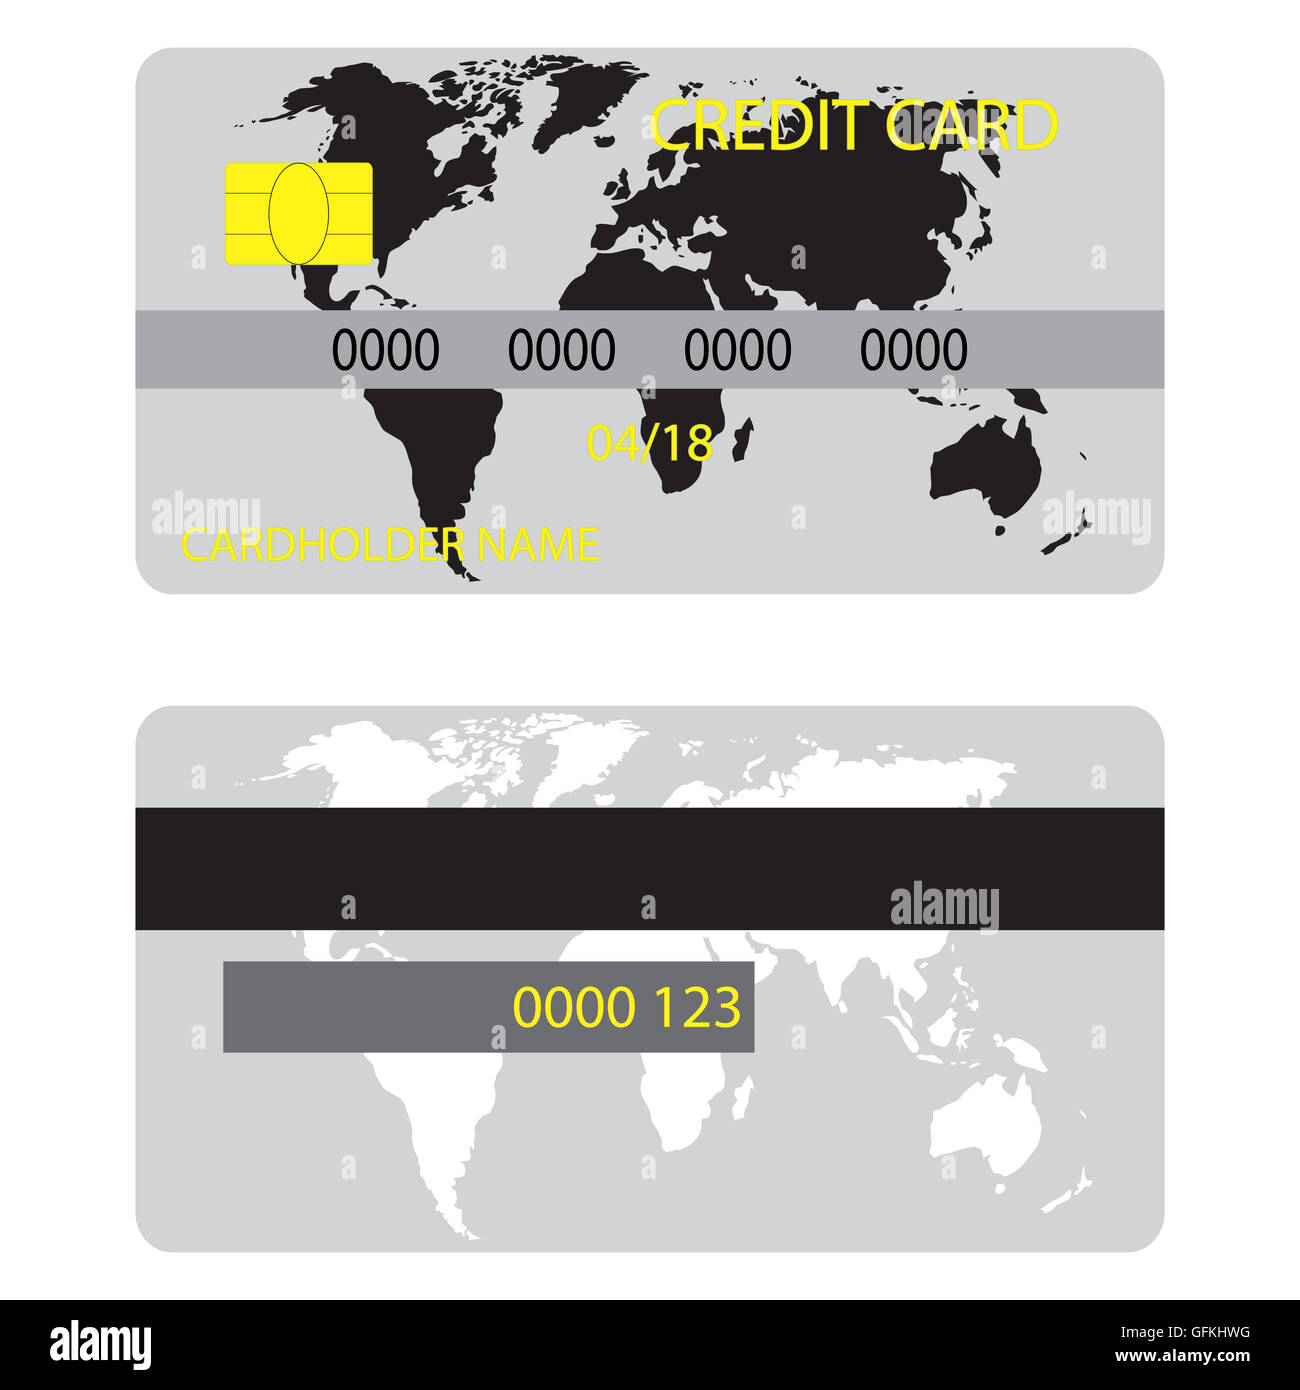 Credit card with silhouette world map. Credit card ico for shopping with money, vector illustration Stock Photo